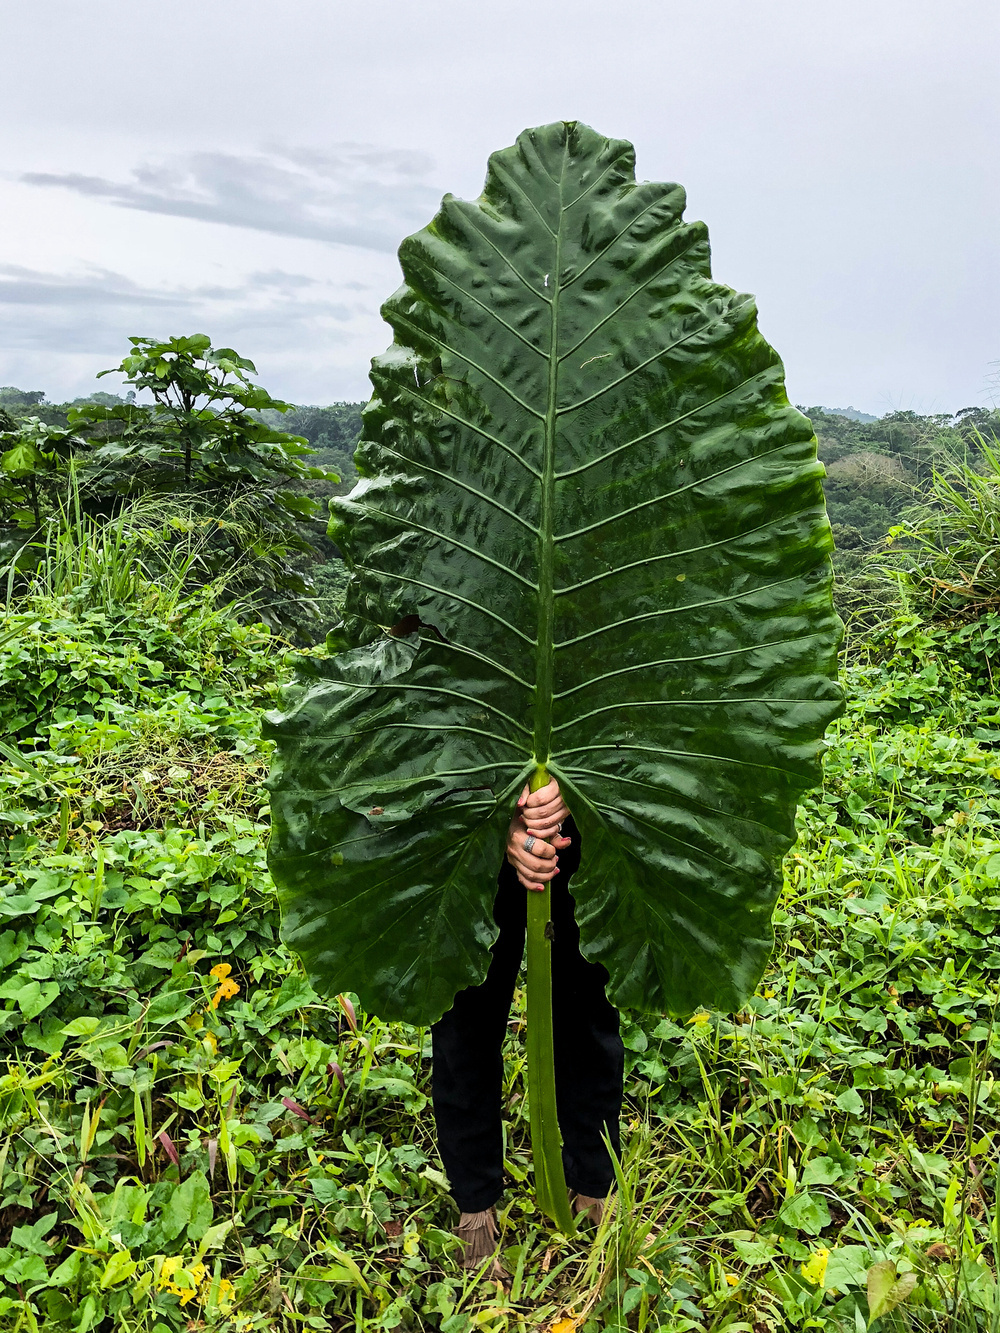 A person standing outdoors holding a large leaf in front of them, concealing their body. The background shows a green, lush landscape.